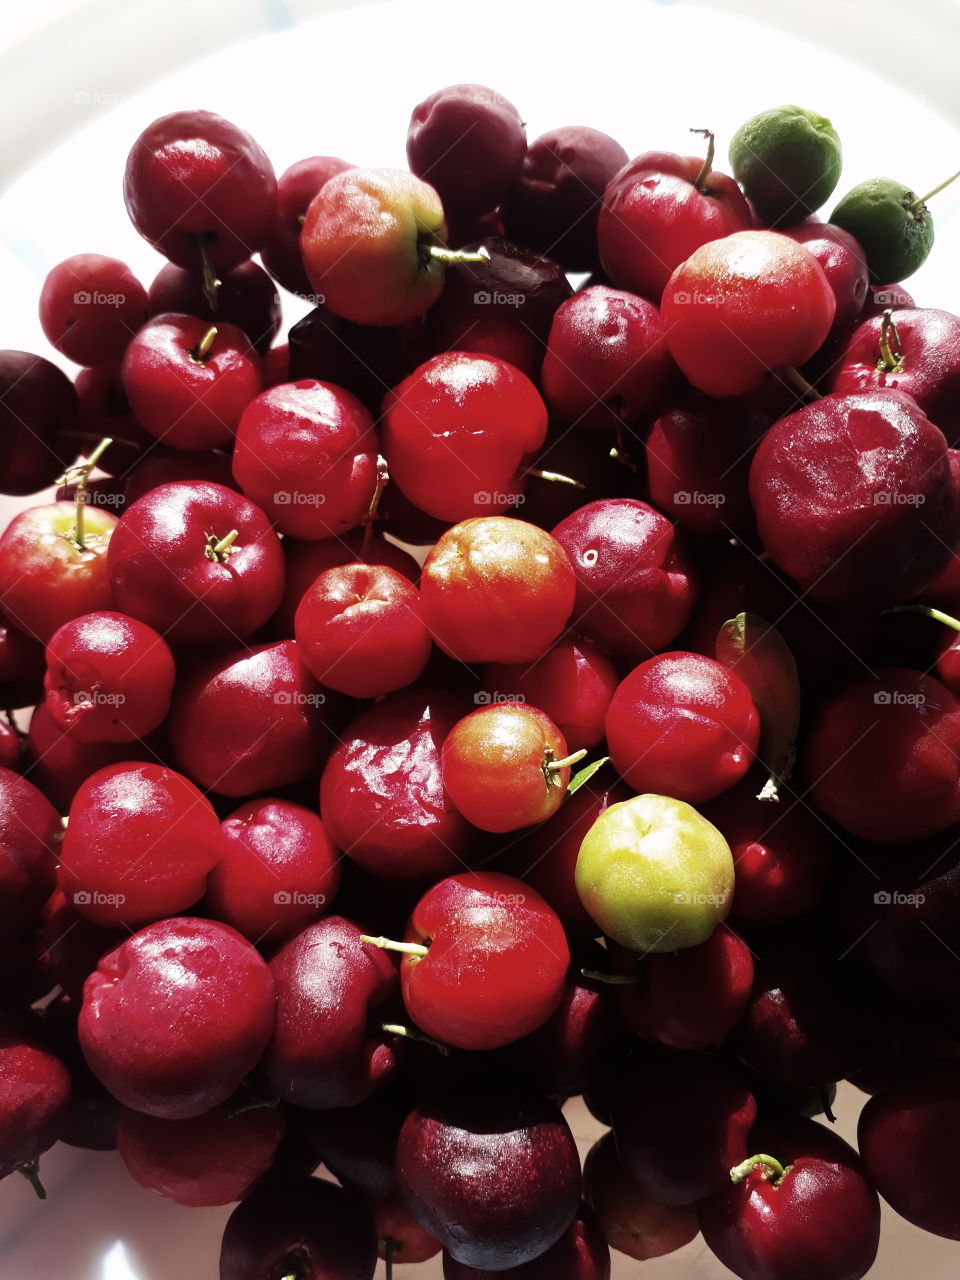 The acerola, azerola, parsnip, cherry-de-barbados or cherry-of-the-Antilles is a shrub of the Malpighiaceae family. The fruit is in a tree called Aceroleira. It originates in the Antilles, Central America and northern South America